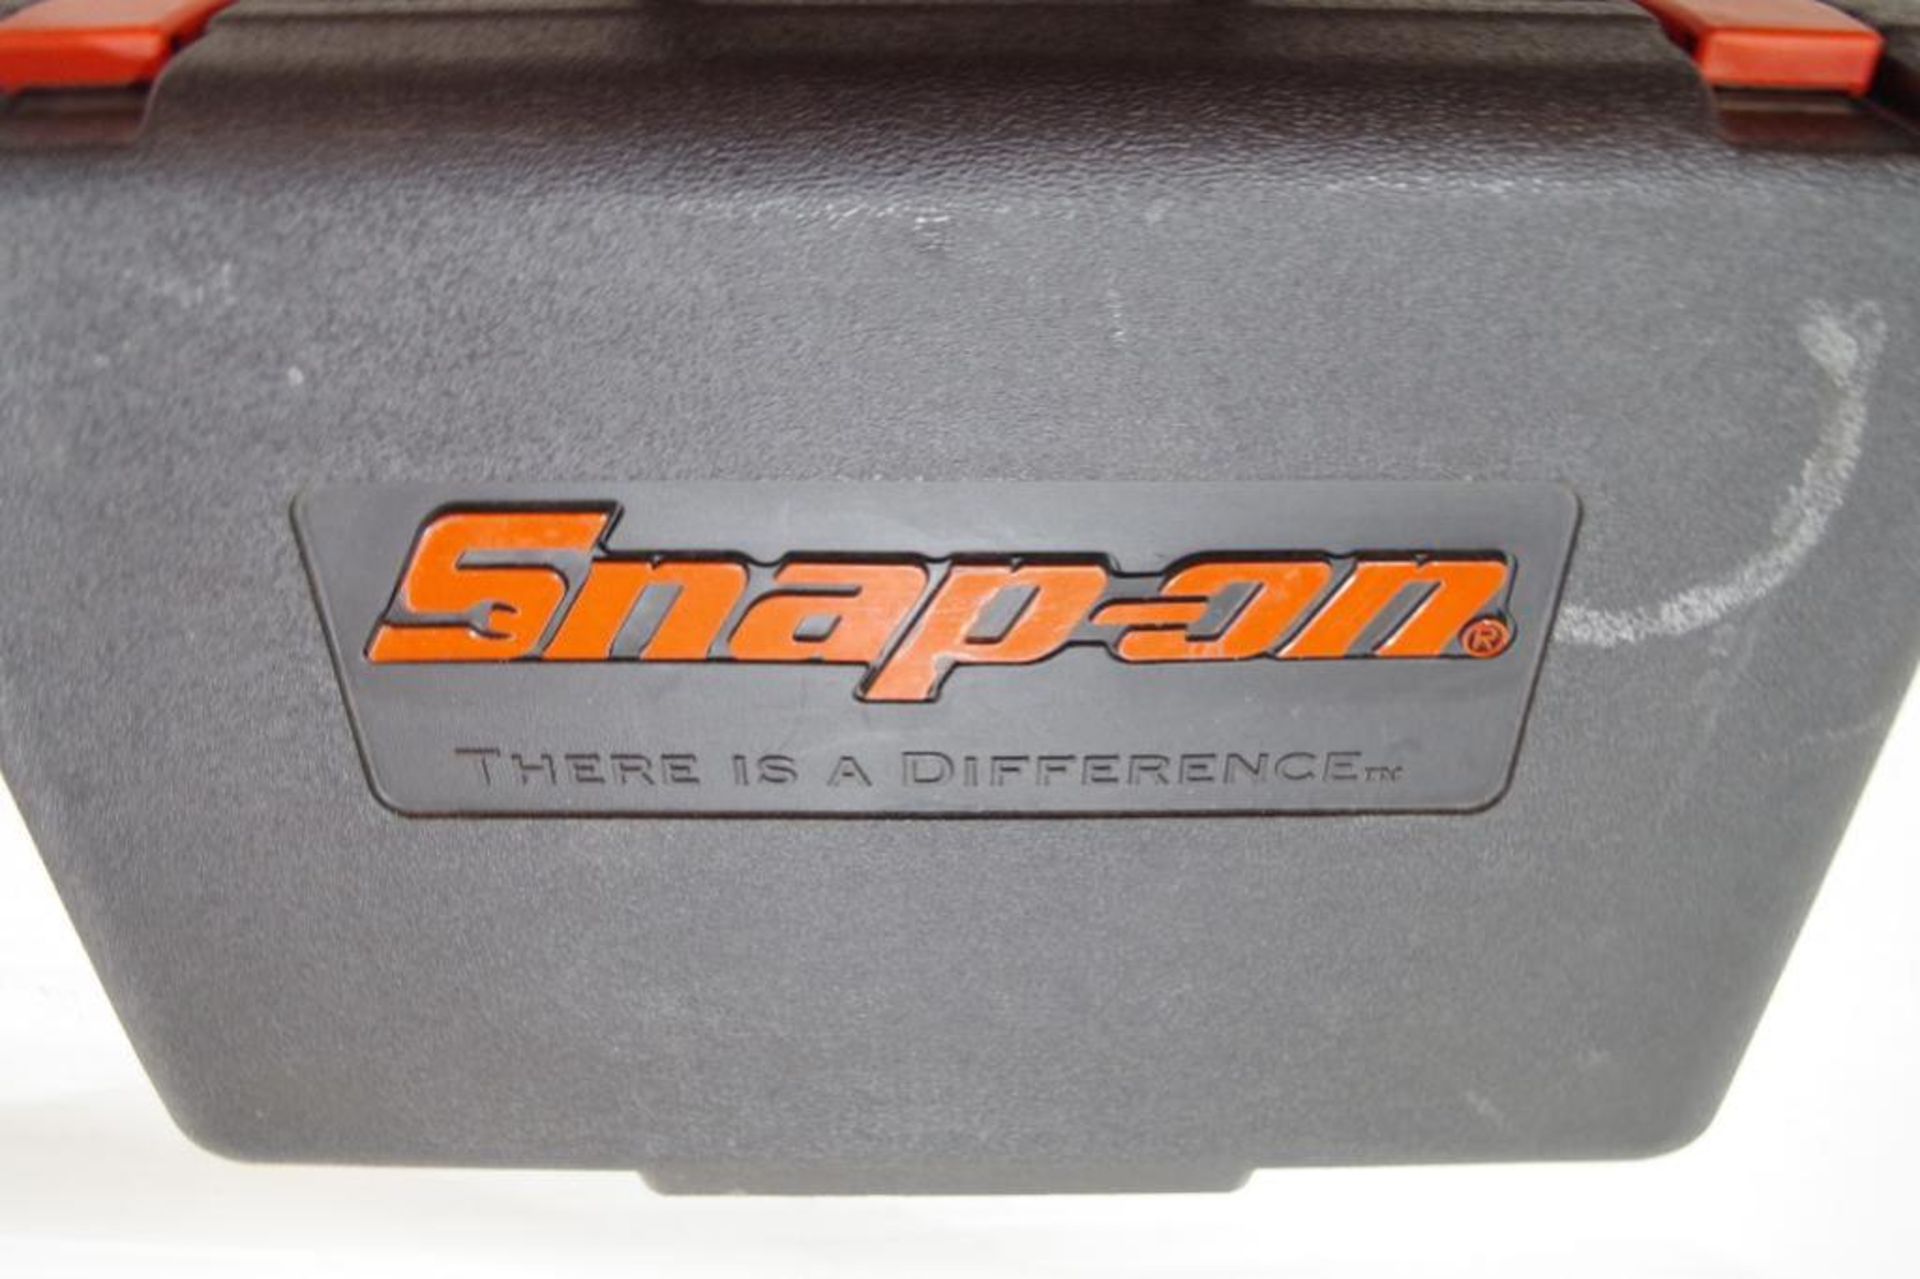 SNAP-ON 18V 1/2" Drill/Driver, Battery, Charger & Case - Image 3 of 5